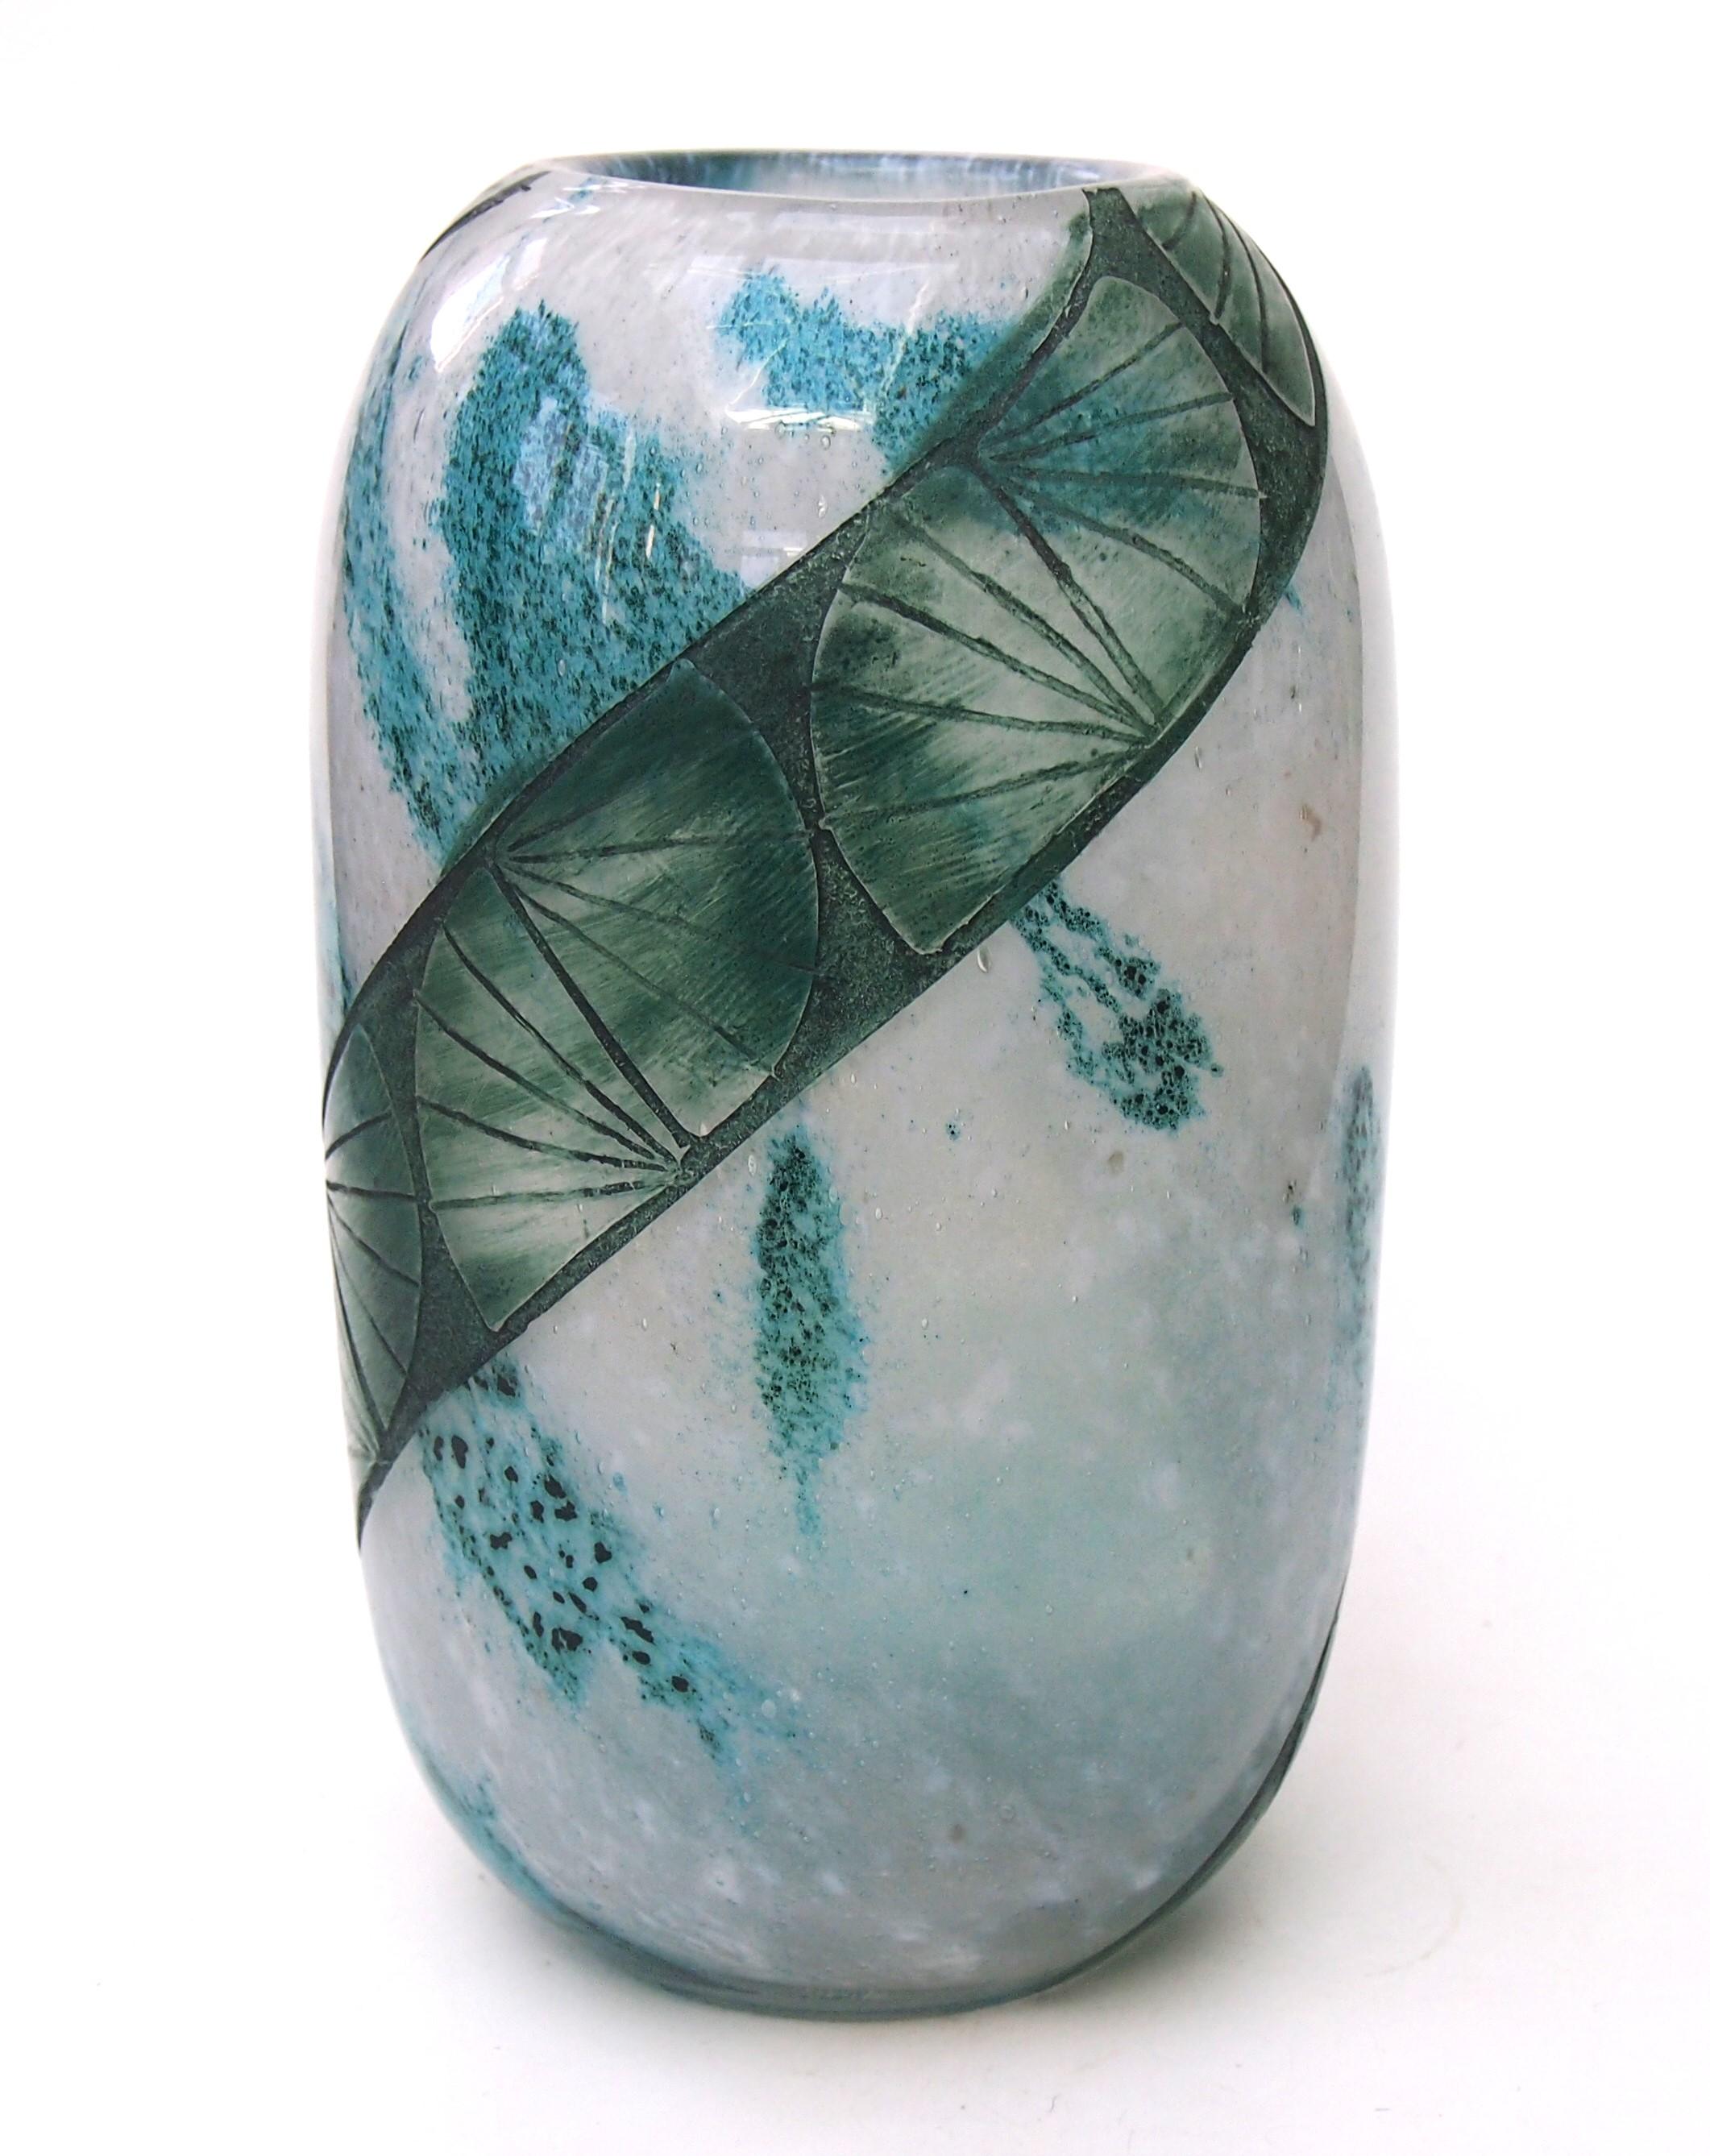 A fabulous signed Art Deco Legras cameo vase. An almost bullet shaped rounded top and bottom cylinder vase in a range of bluey greens -It is made of a heavily, marbled glass which was then cameo cut  with segmented abstract shapes within diagonal